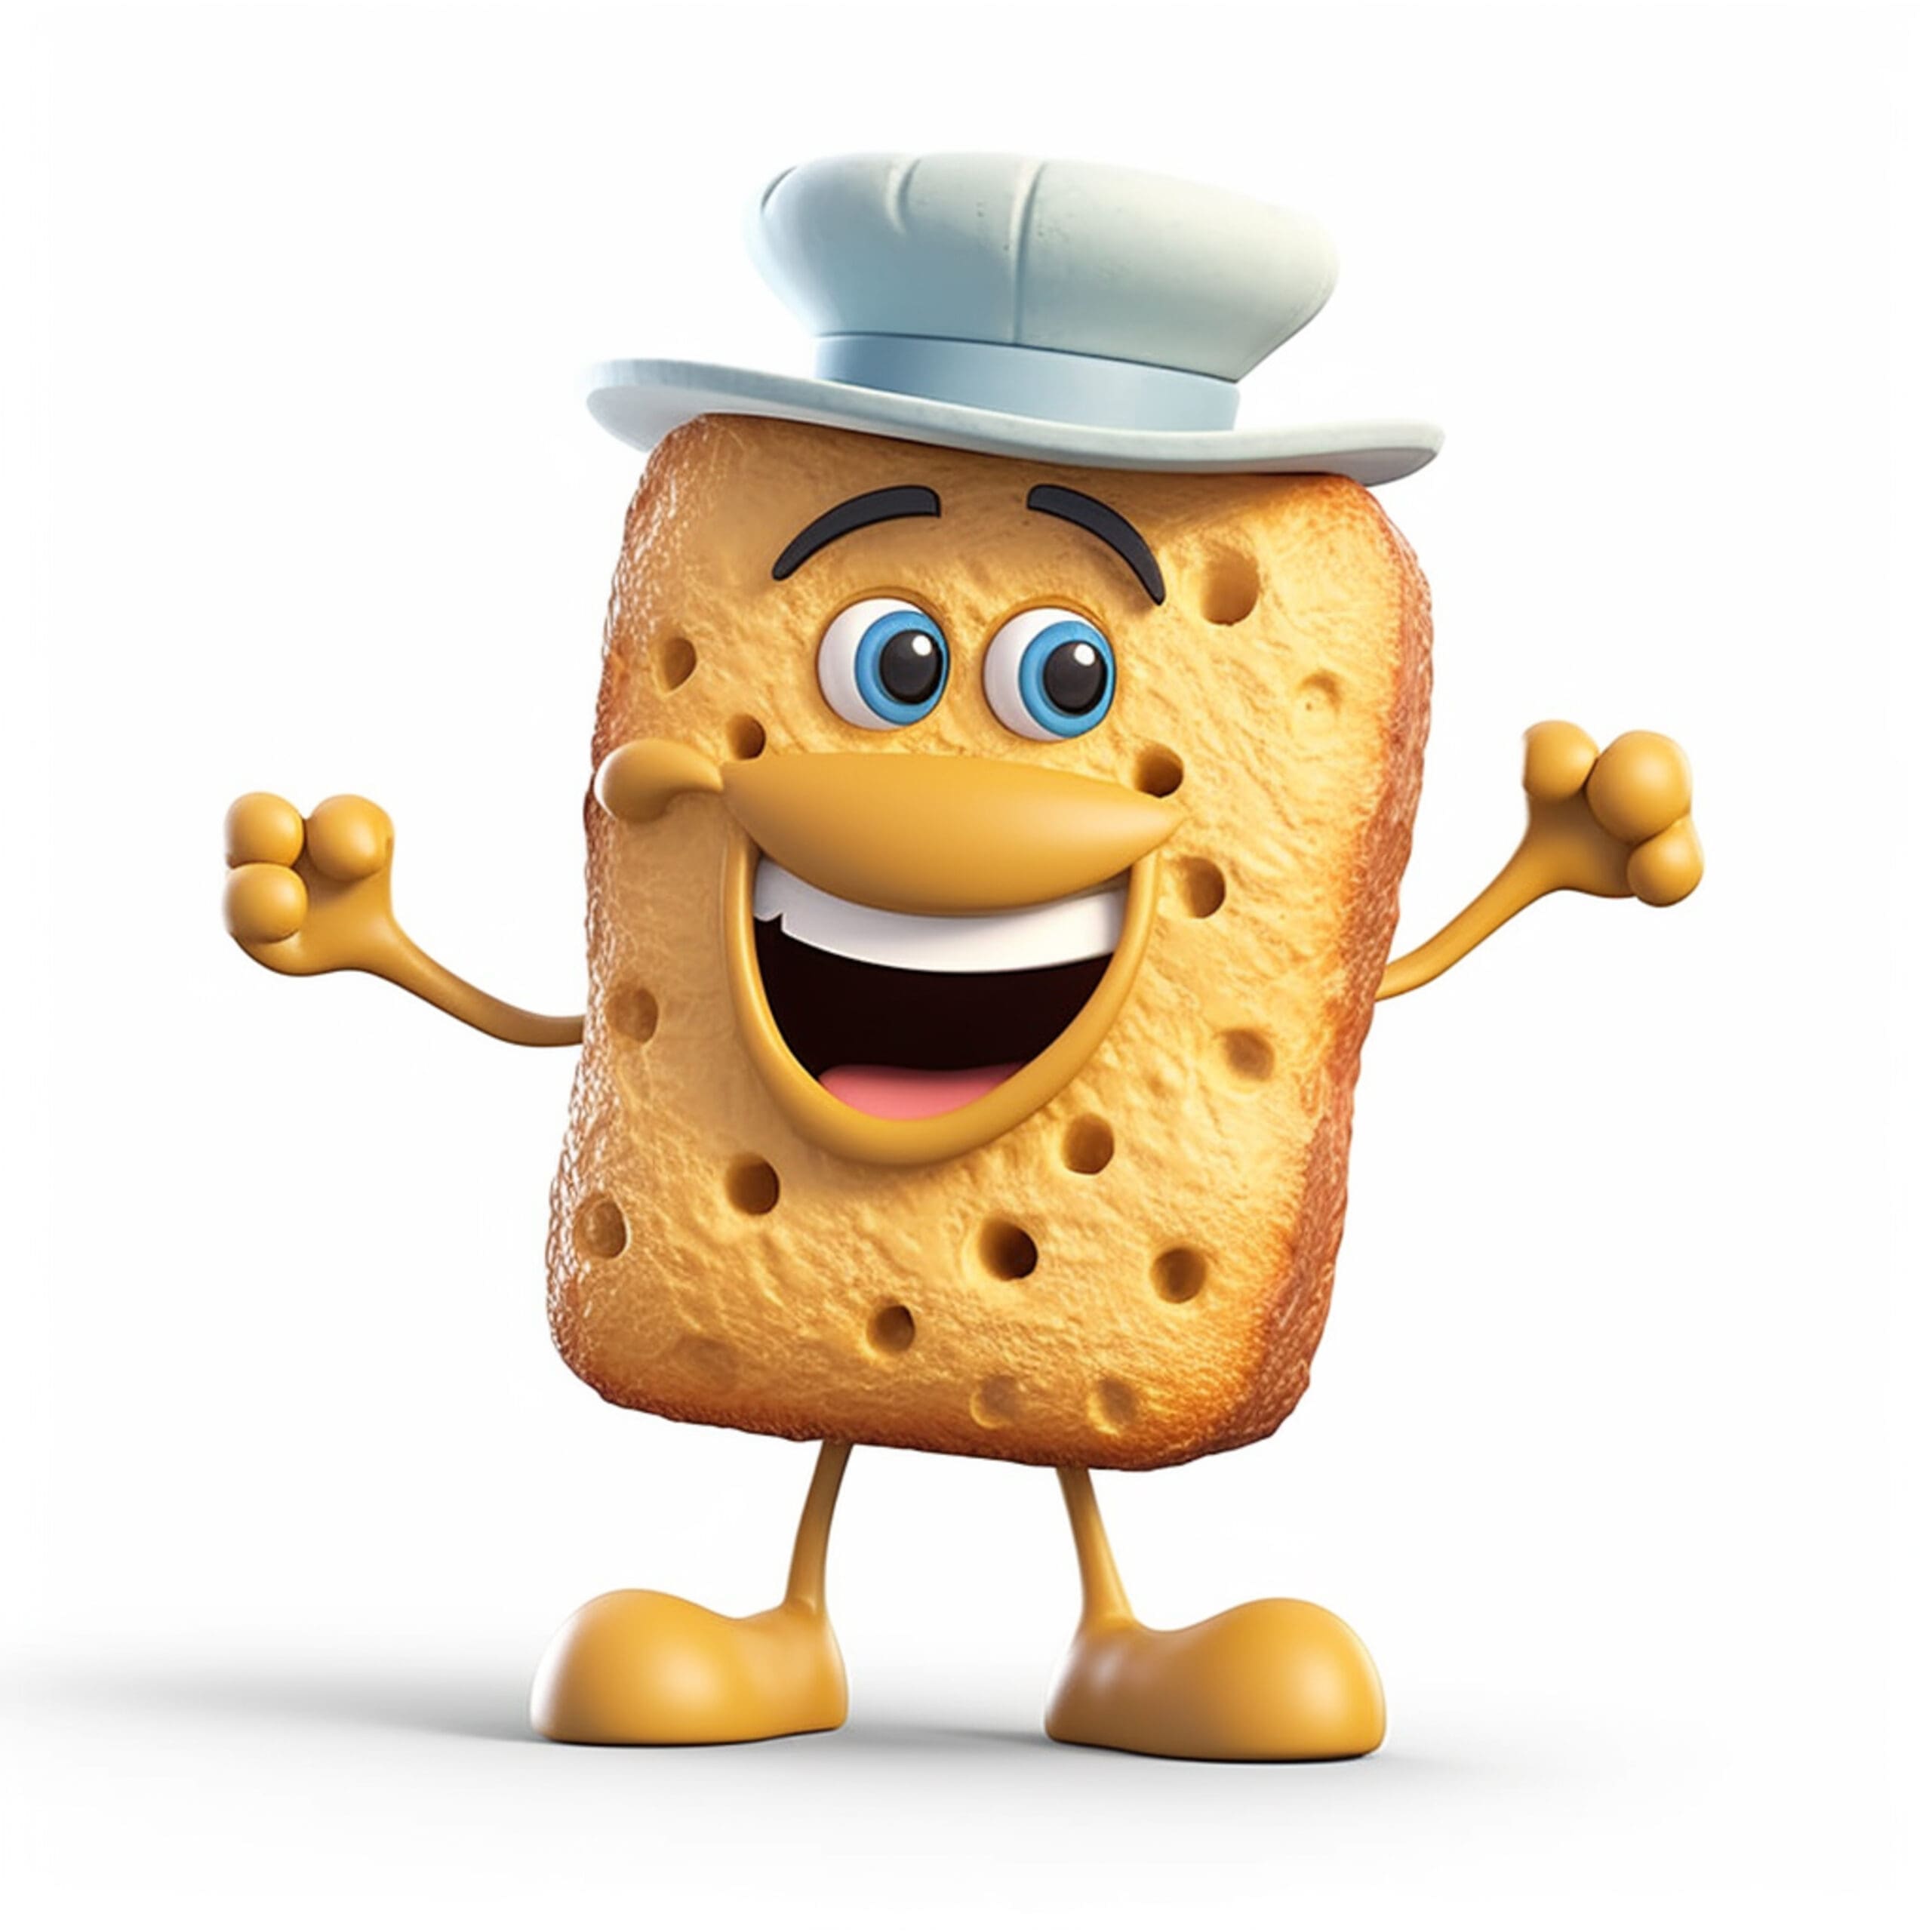 Cartoon graphic of a satisfied biscuit with a chef’s hat and a rolling pin waving goodbye on a colorful background.